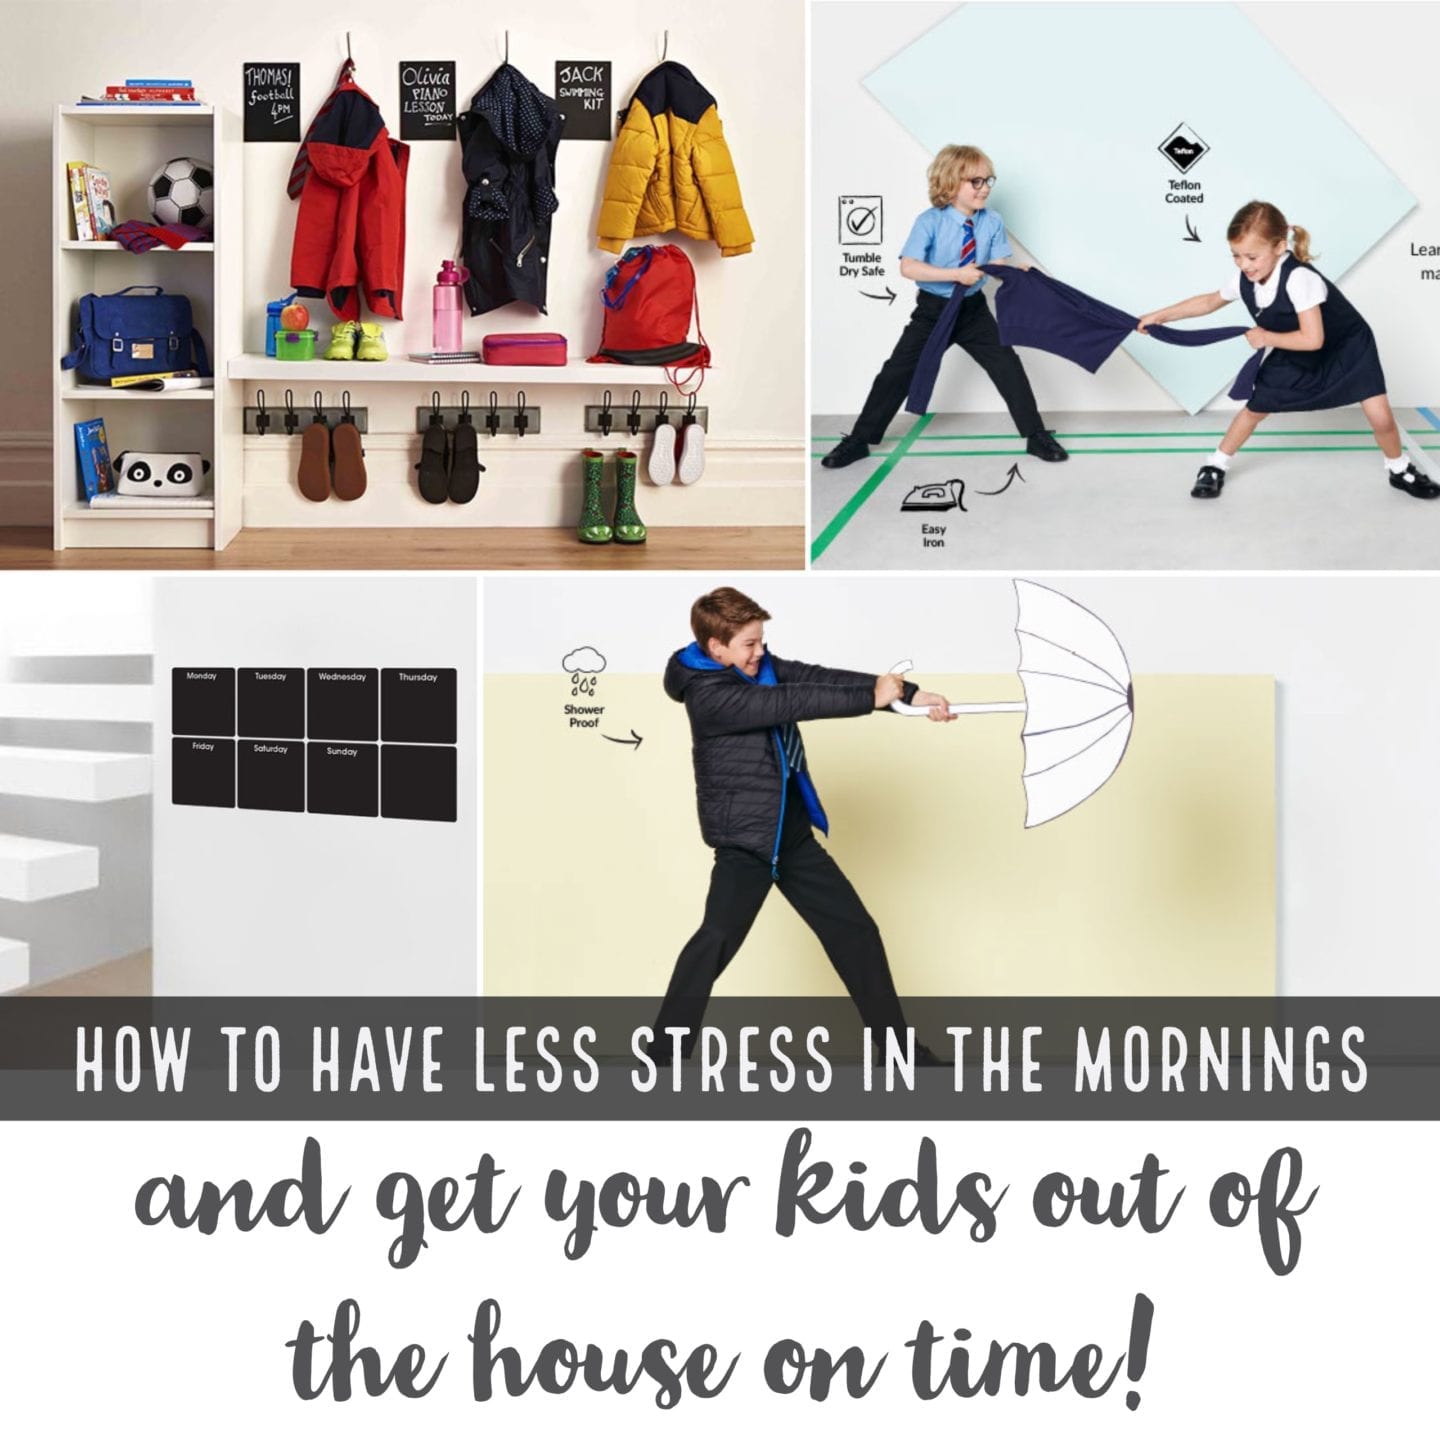 How To Be Less Stressed In The Mornings And Get The Kids Out Of The House On Time